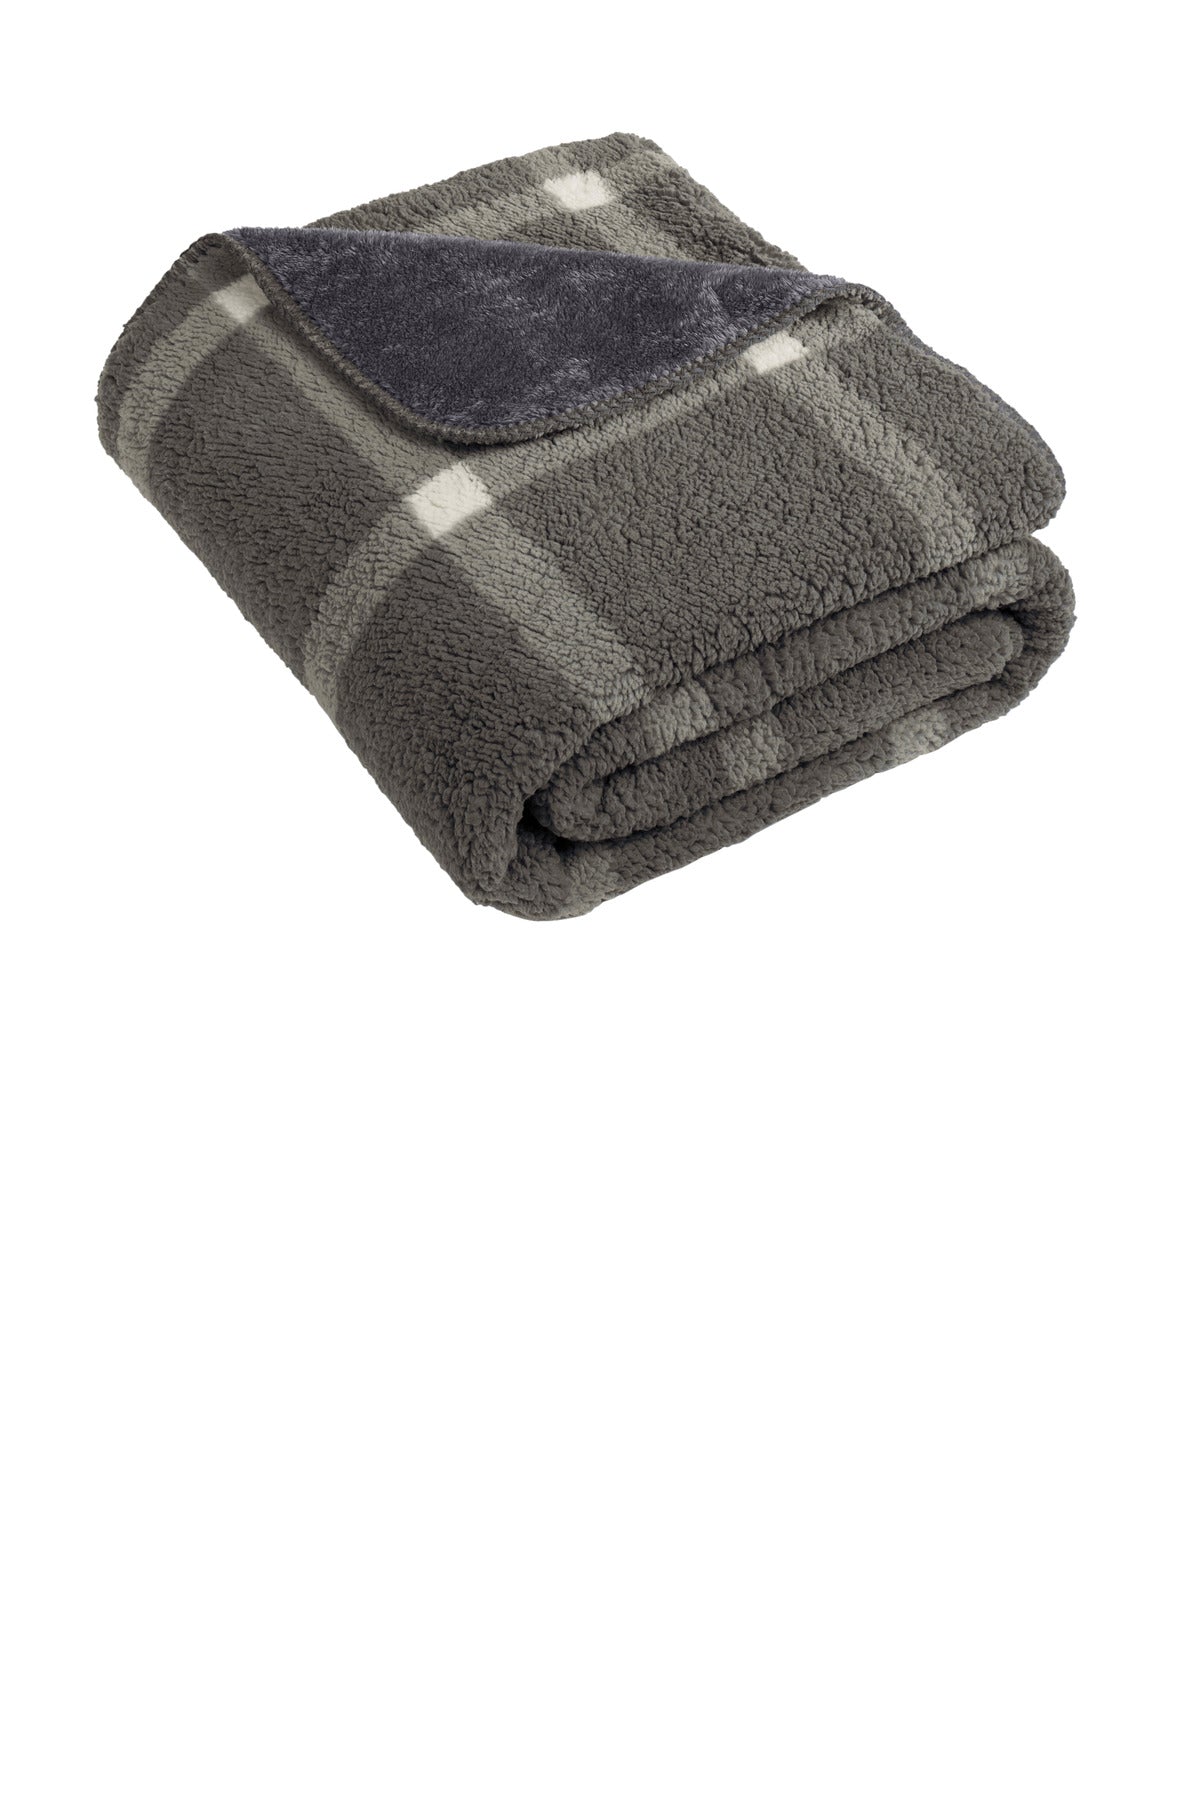 Port Authority Double-Sided Sherpa/Plush Blanket BP48